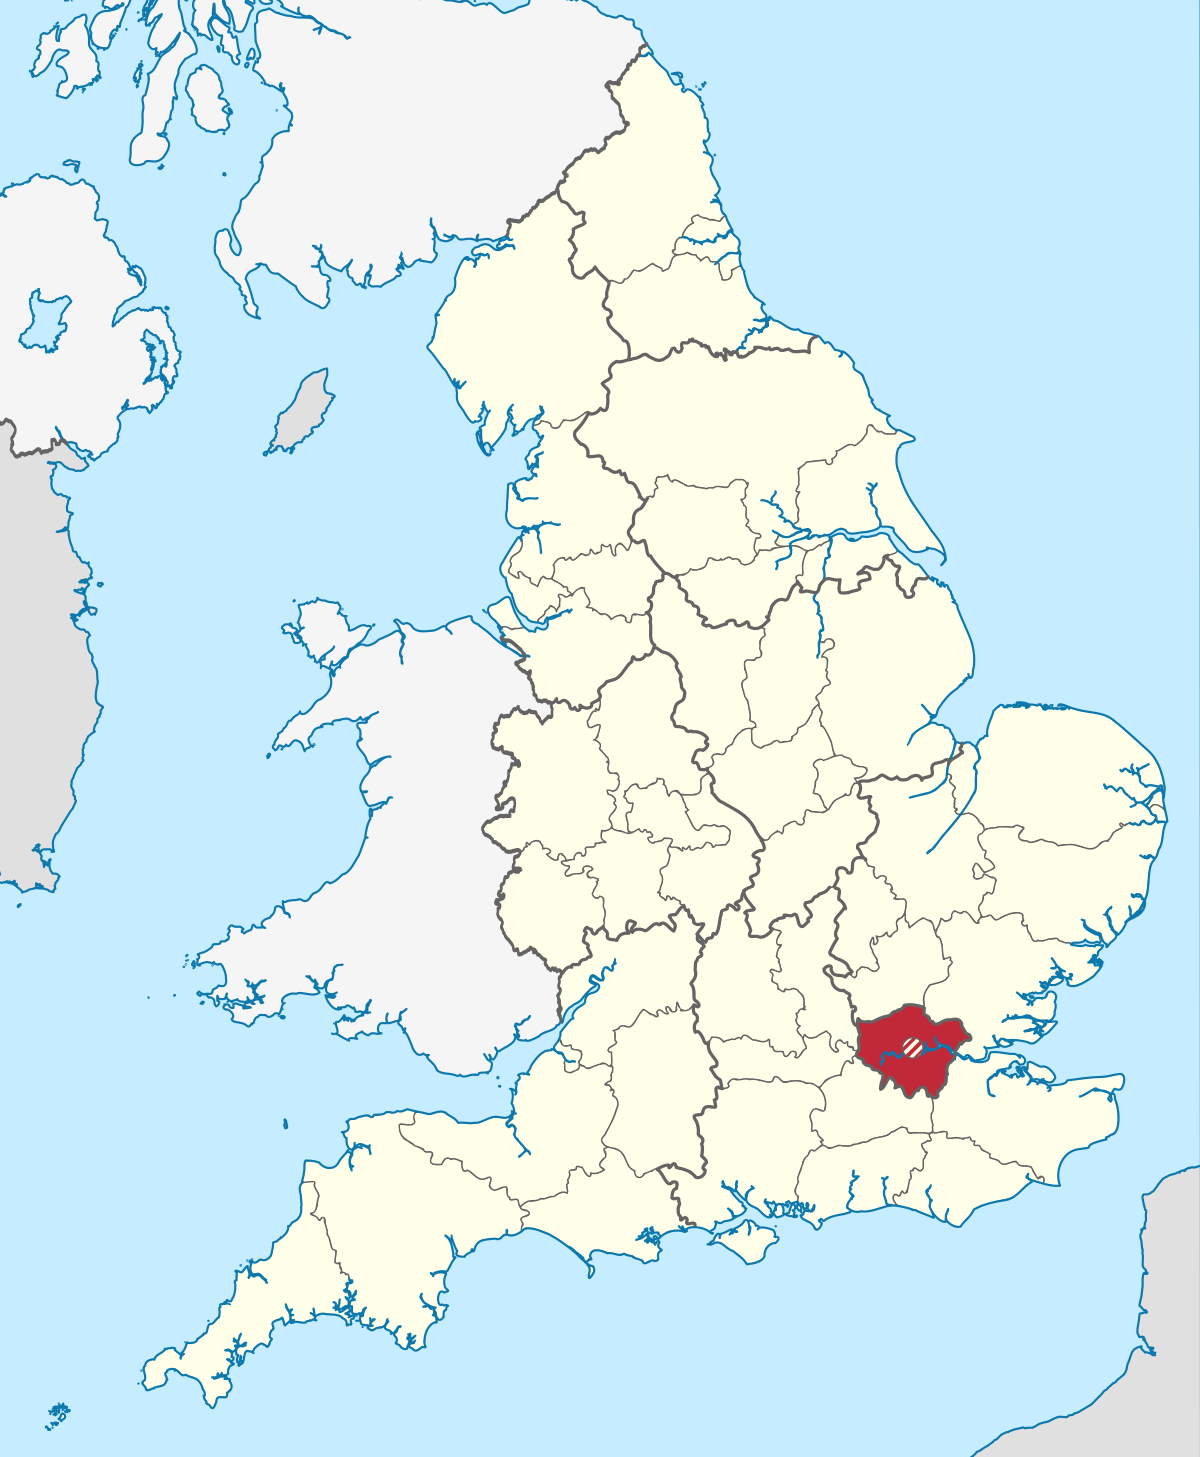 1200px-Greater_London_administrative_area_in_England.svg